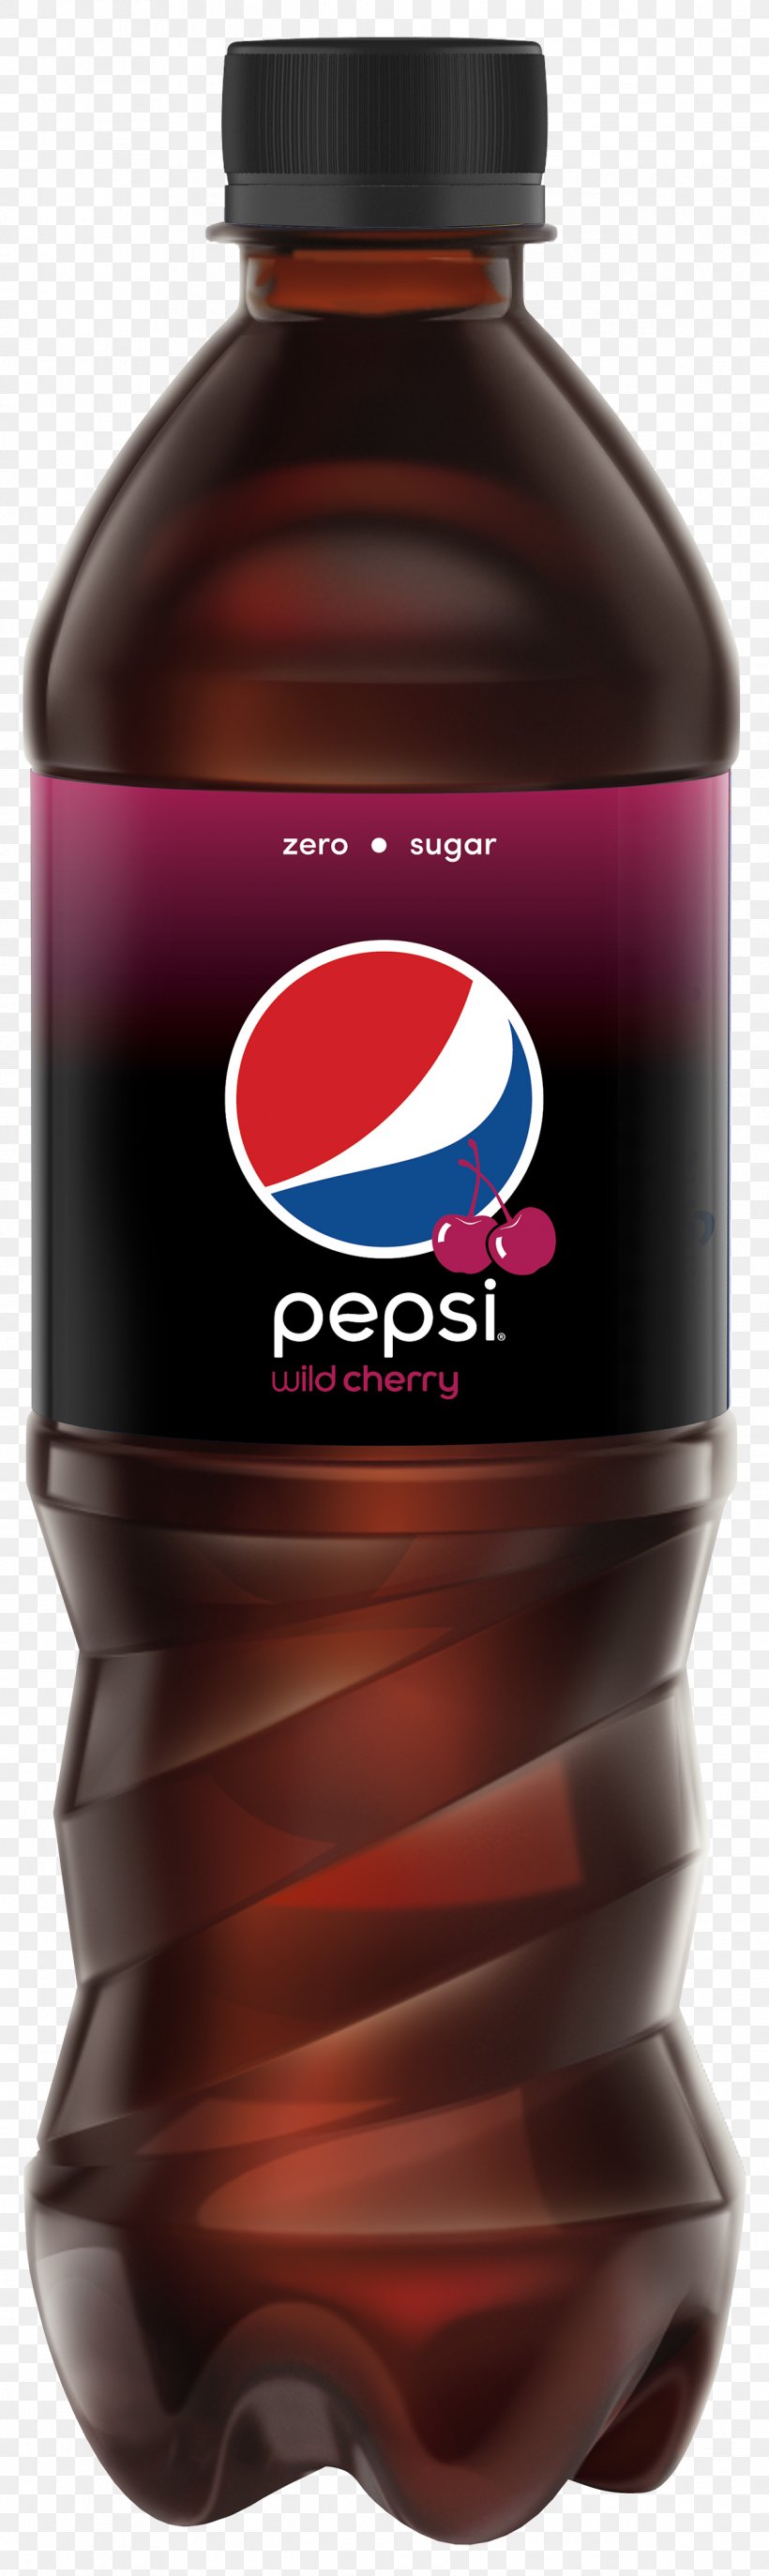 Pepsi One Fizzy Drinks Pizza Pepsi Wild Cherry, PNG, 1194x4000px, 7 Up, Pepsi, Bottle, Can, Carbonated Drink Download Free